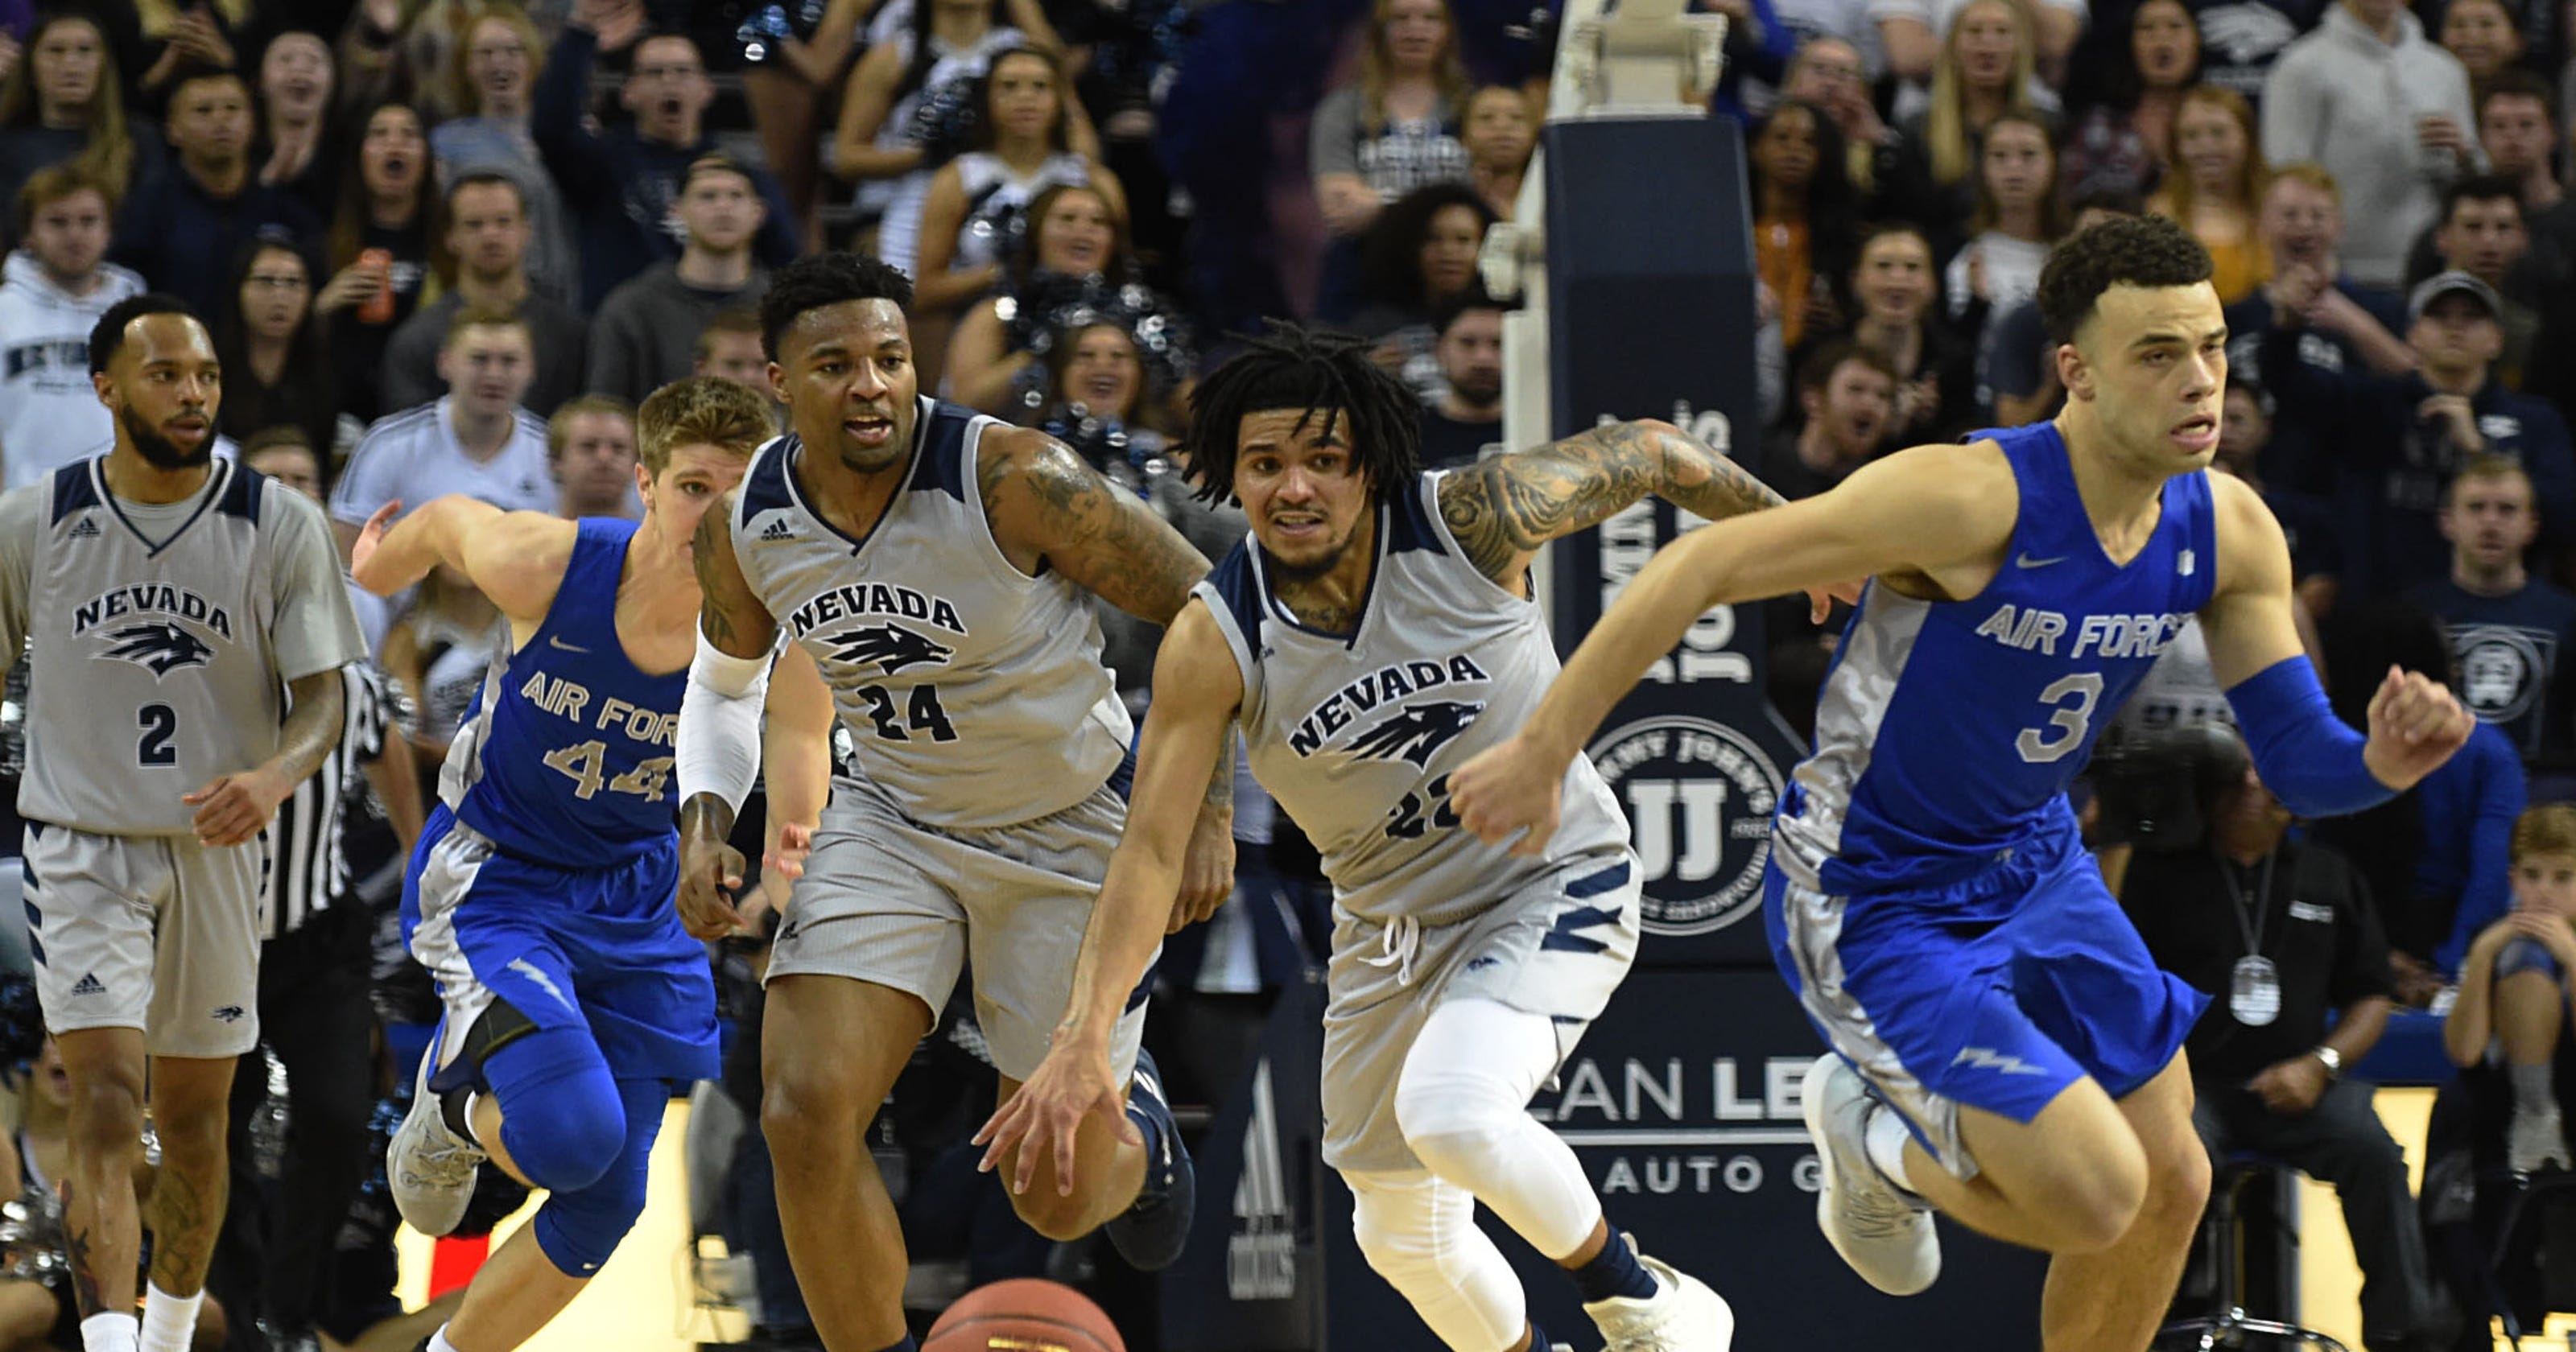 Nevada basketball jumps up to seventh in AP Top 25 national poll